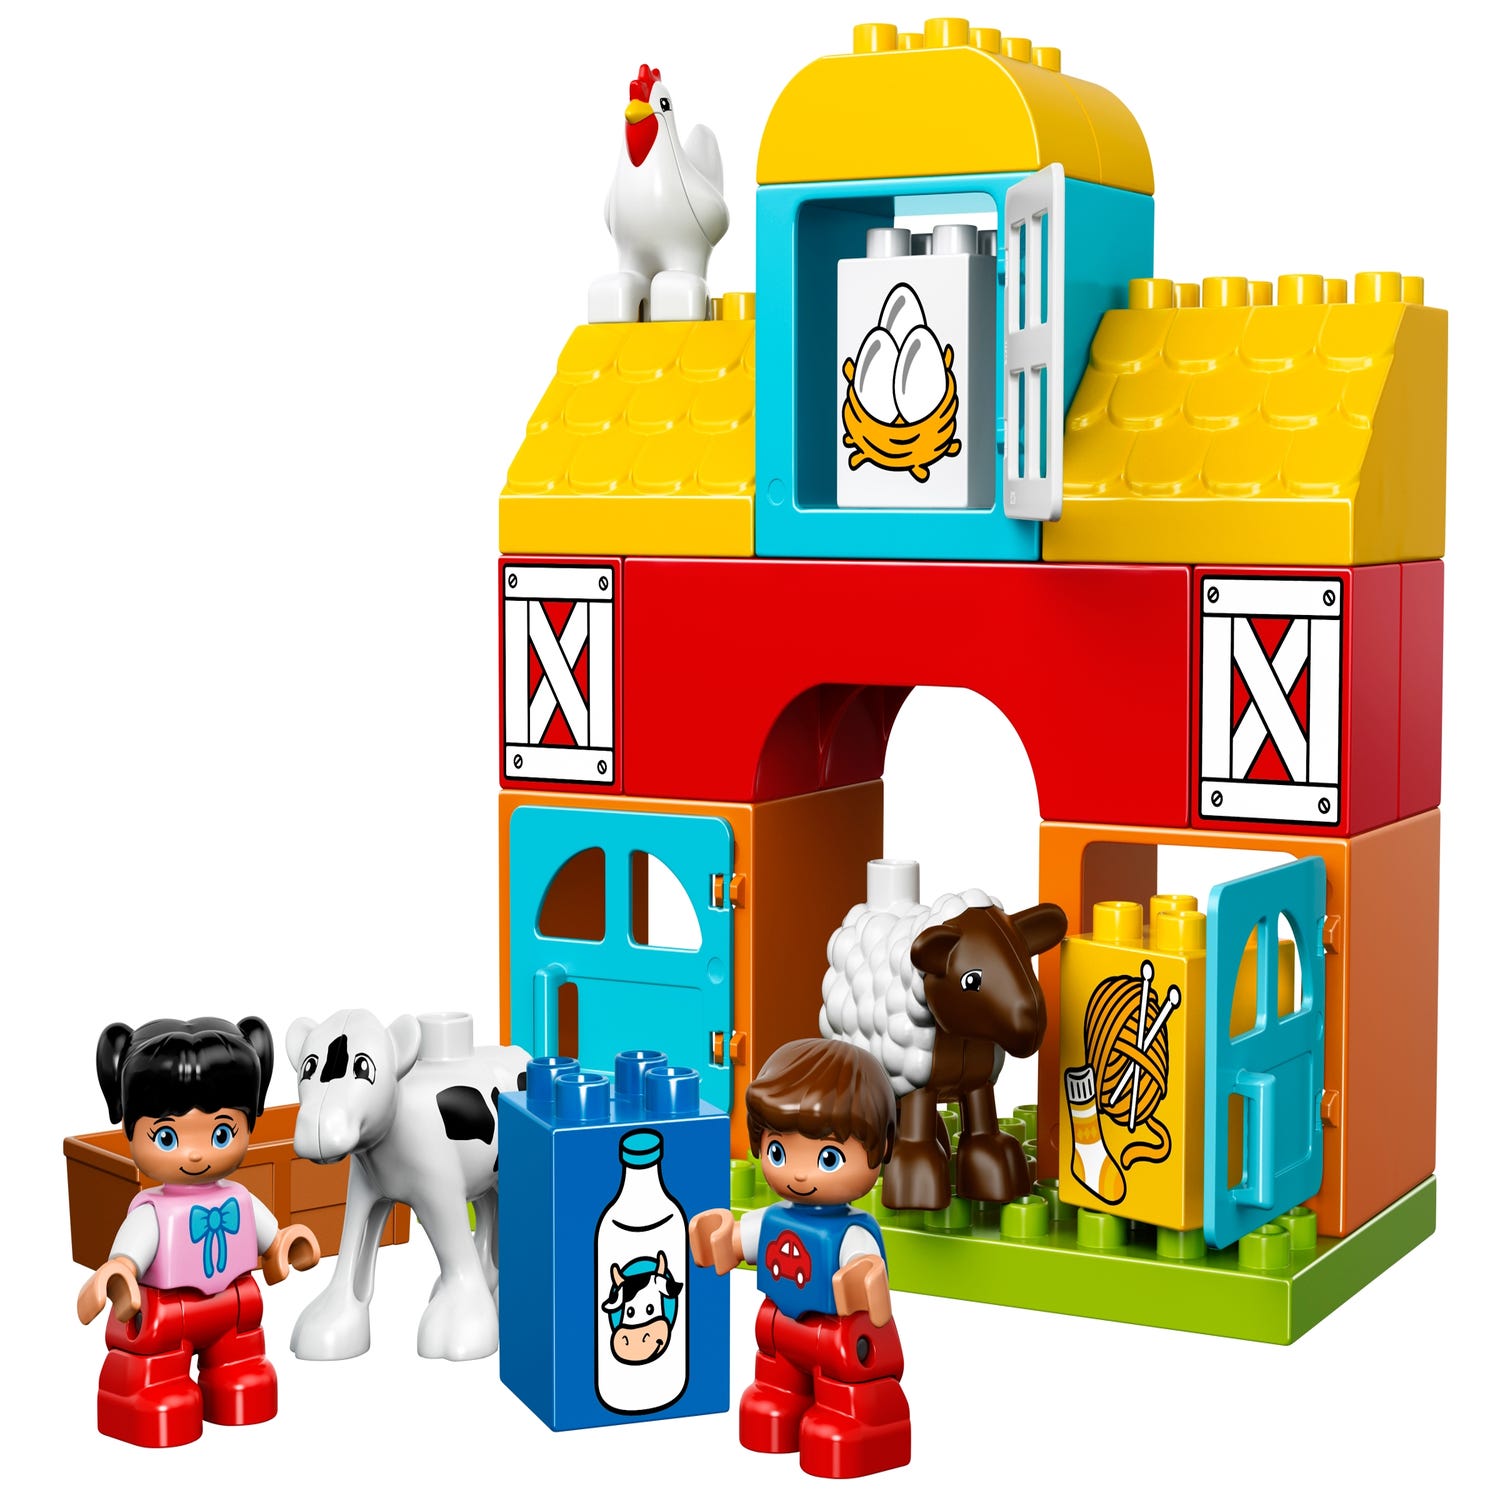 My First Farm 10617 | DUPLO® | Buy online at the Official LEGO® Shop US